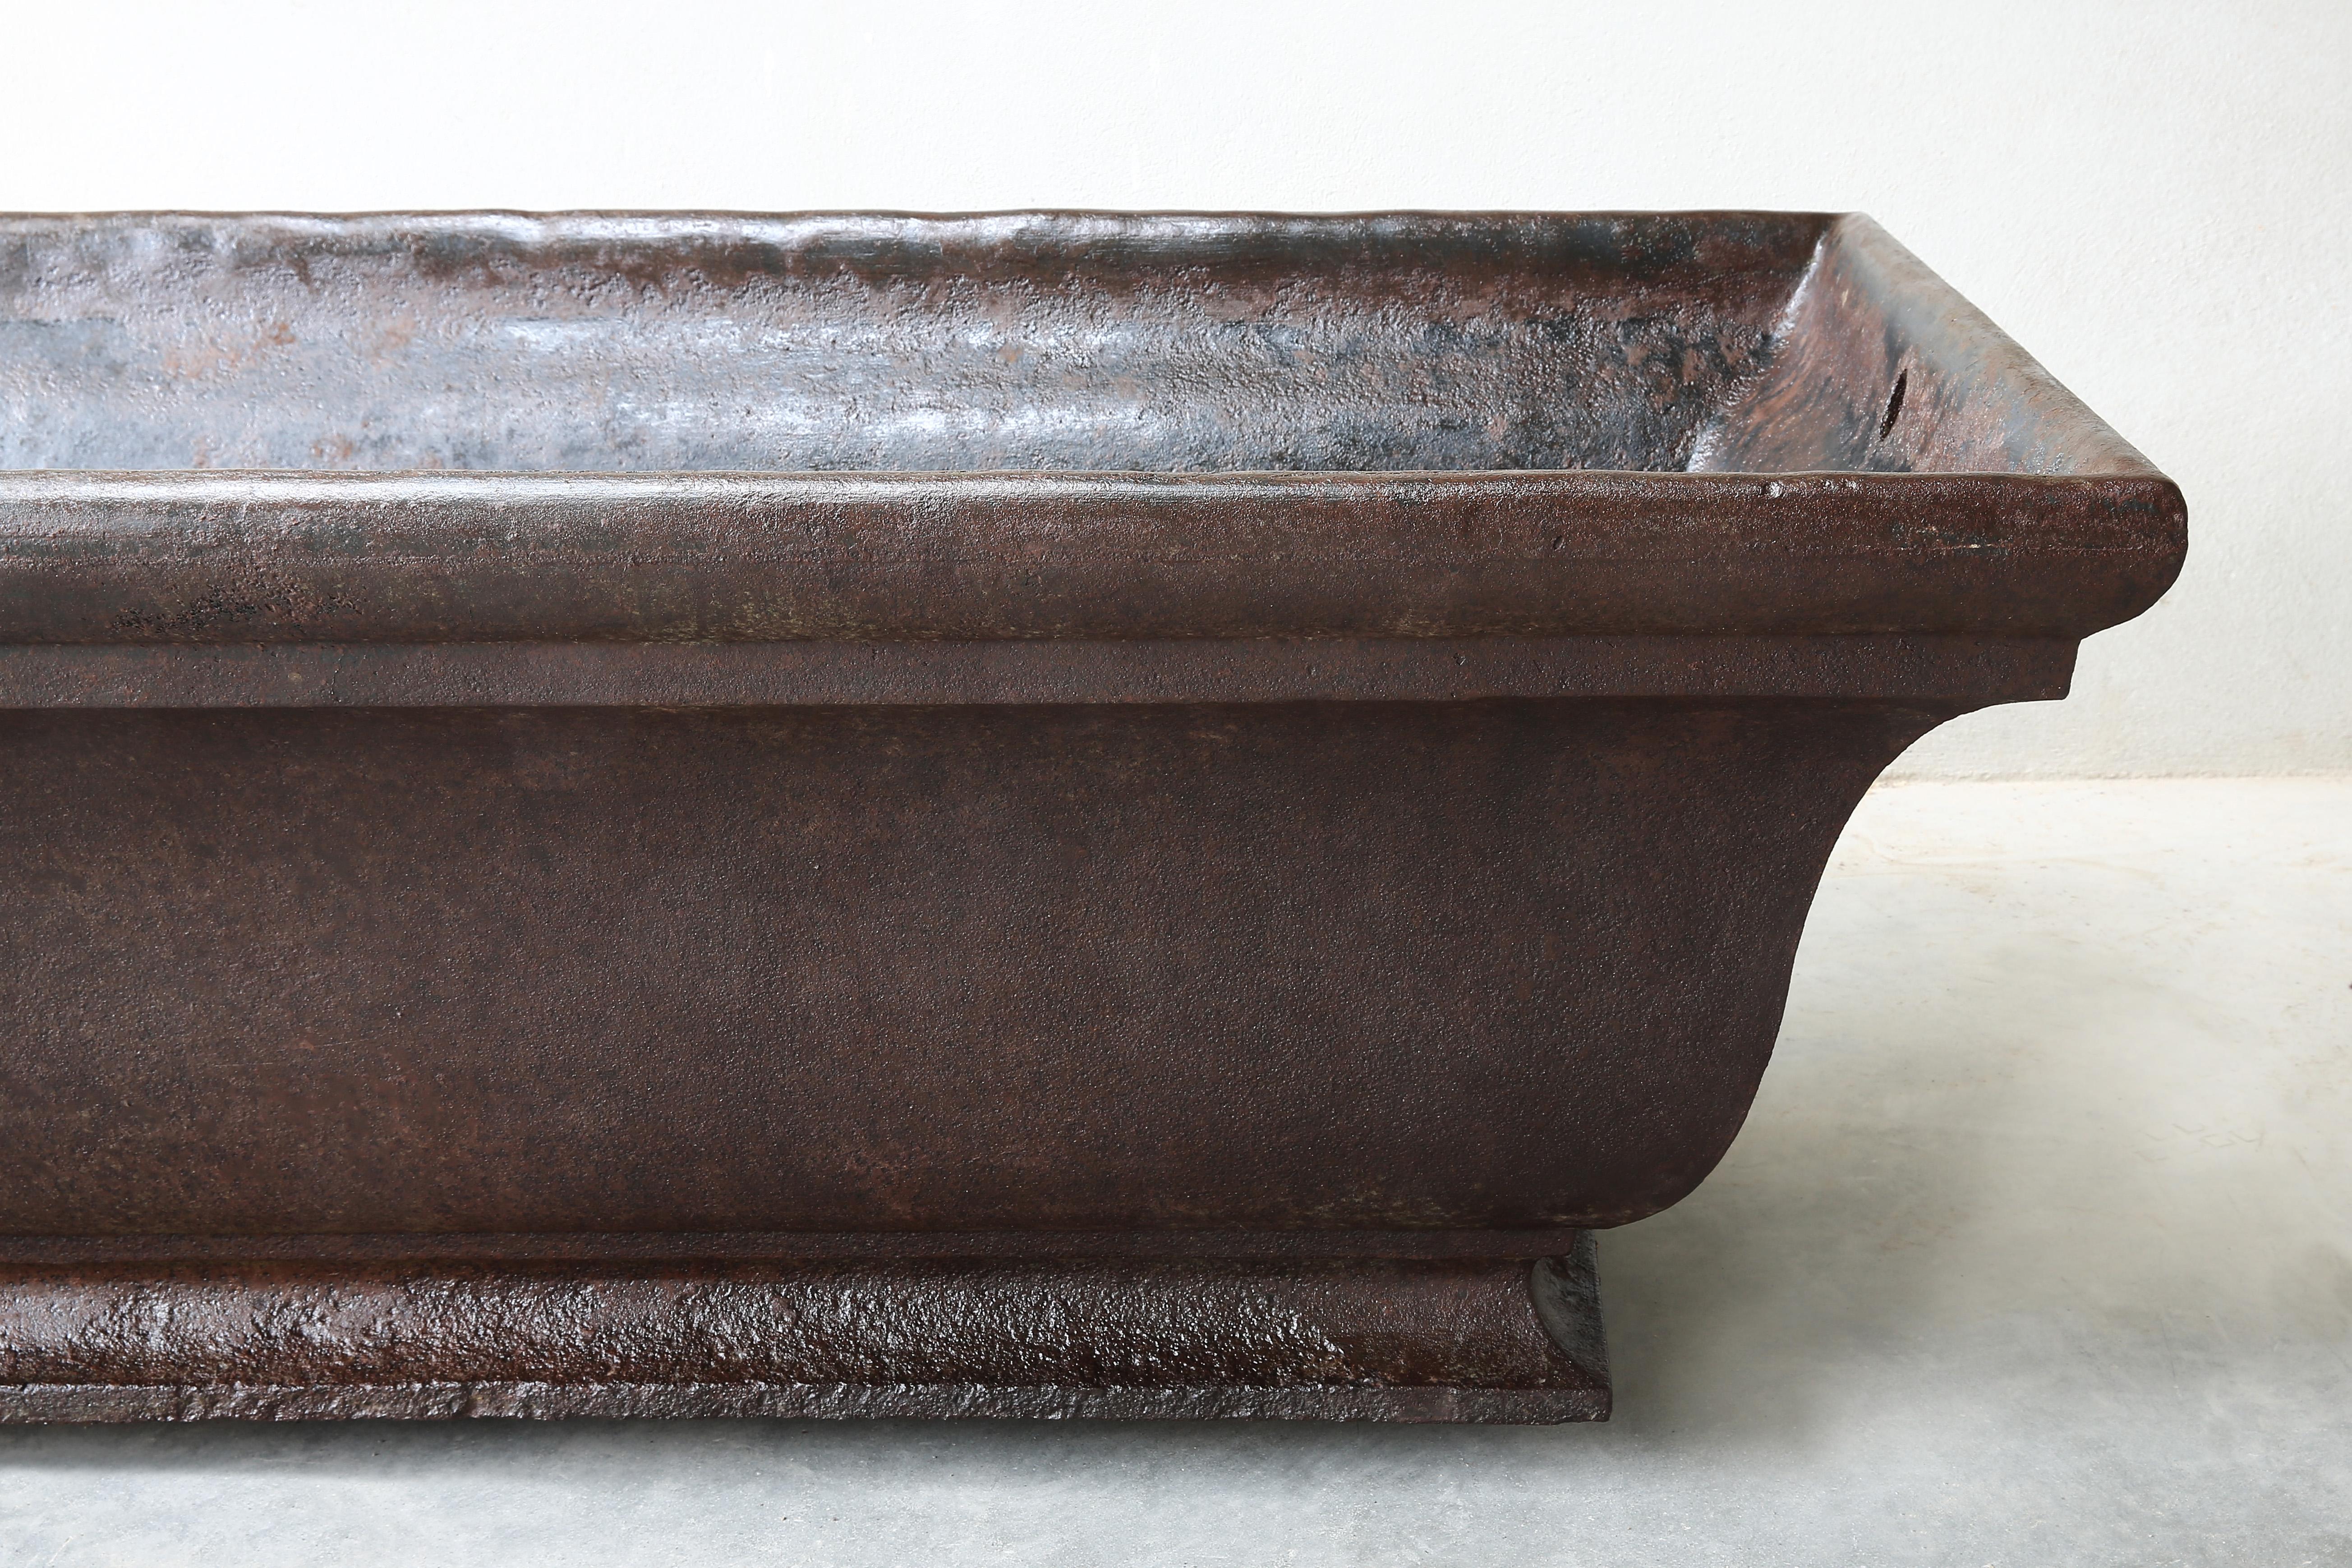 Beautiful antique cast iron drinking trough from 1885. This old French cast iron trough comes from the foundry (fonterie) from Varigney Haute Saone and was formerly used as a drinking bowl that stood at the entrance of the village to welcome people